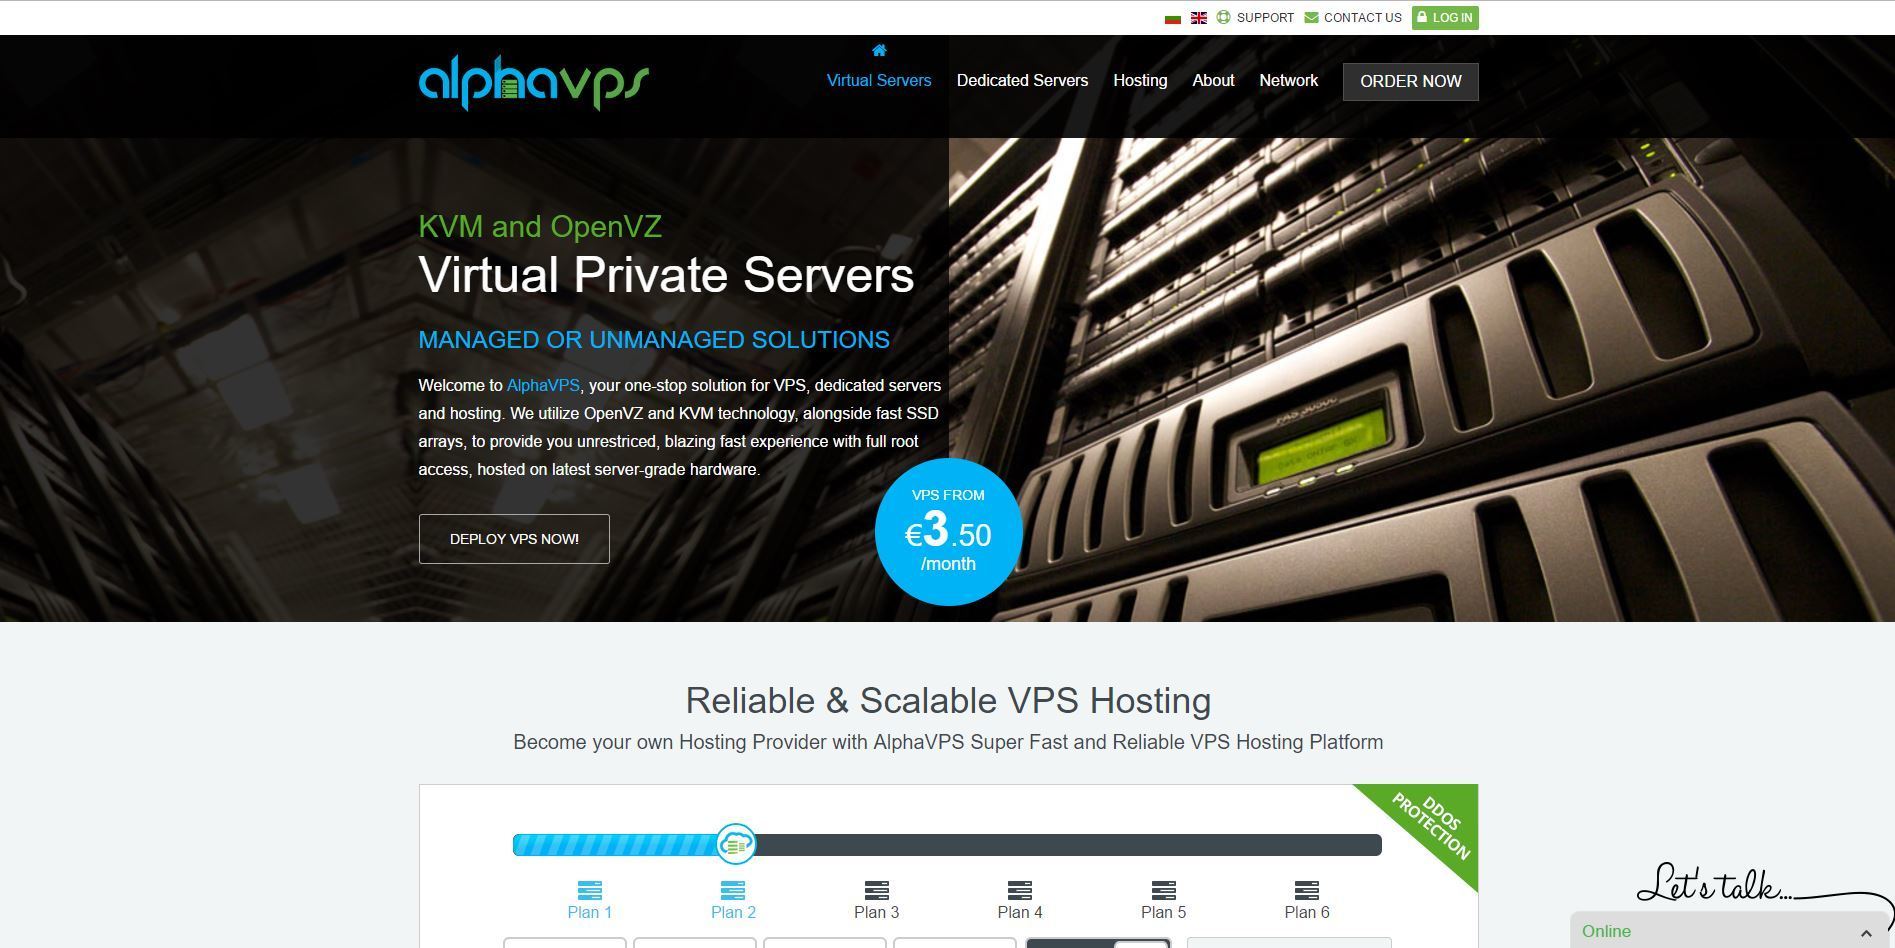 Alphavps Offer Vps And Dedicated Server Plans On Sale Low End Box Images, Photos, Reviews